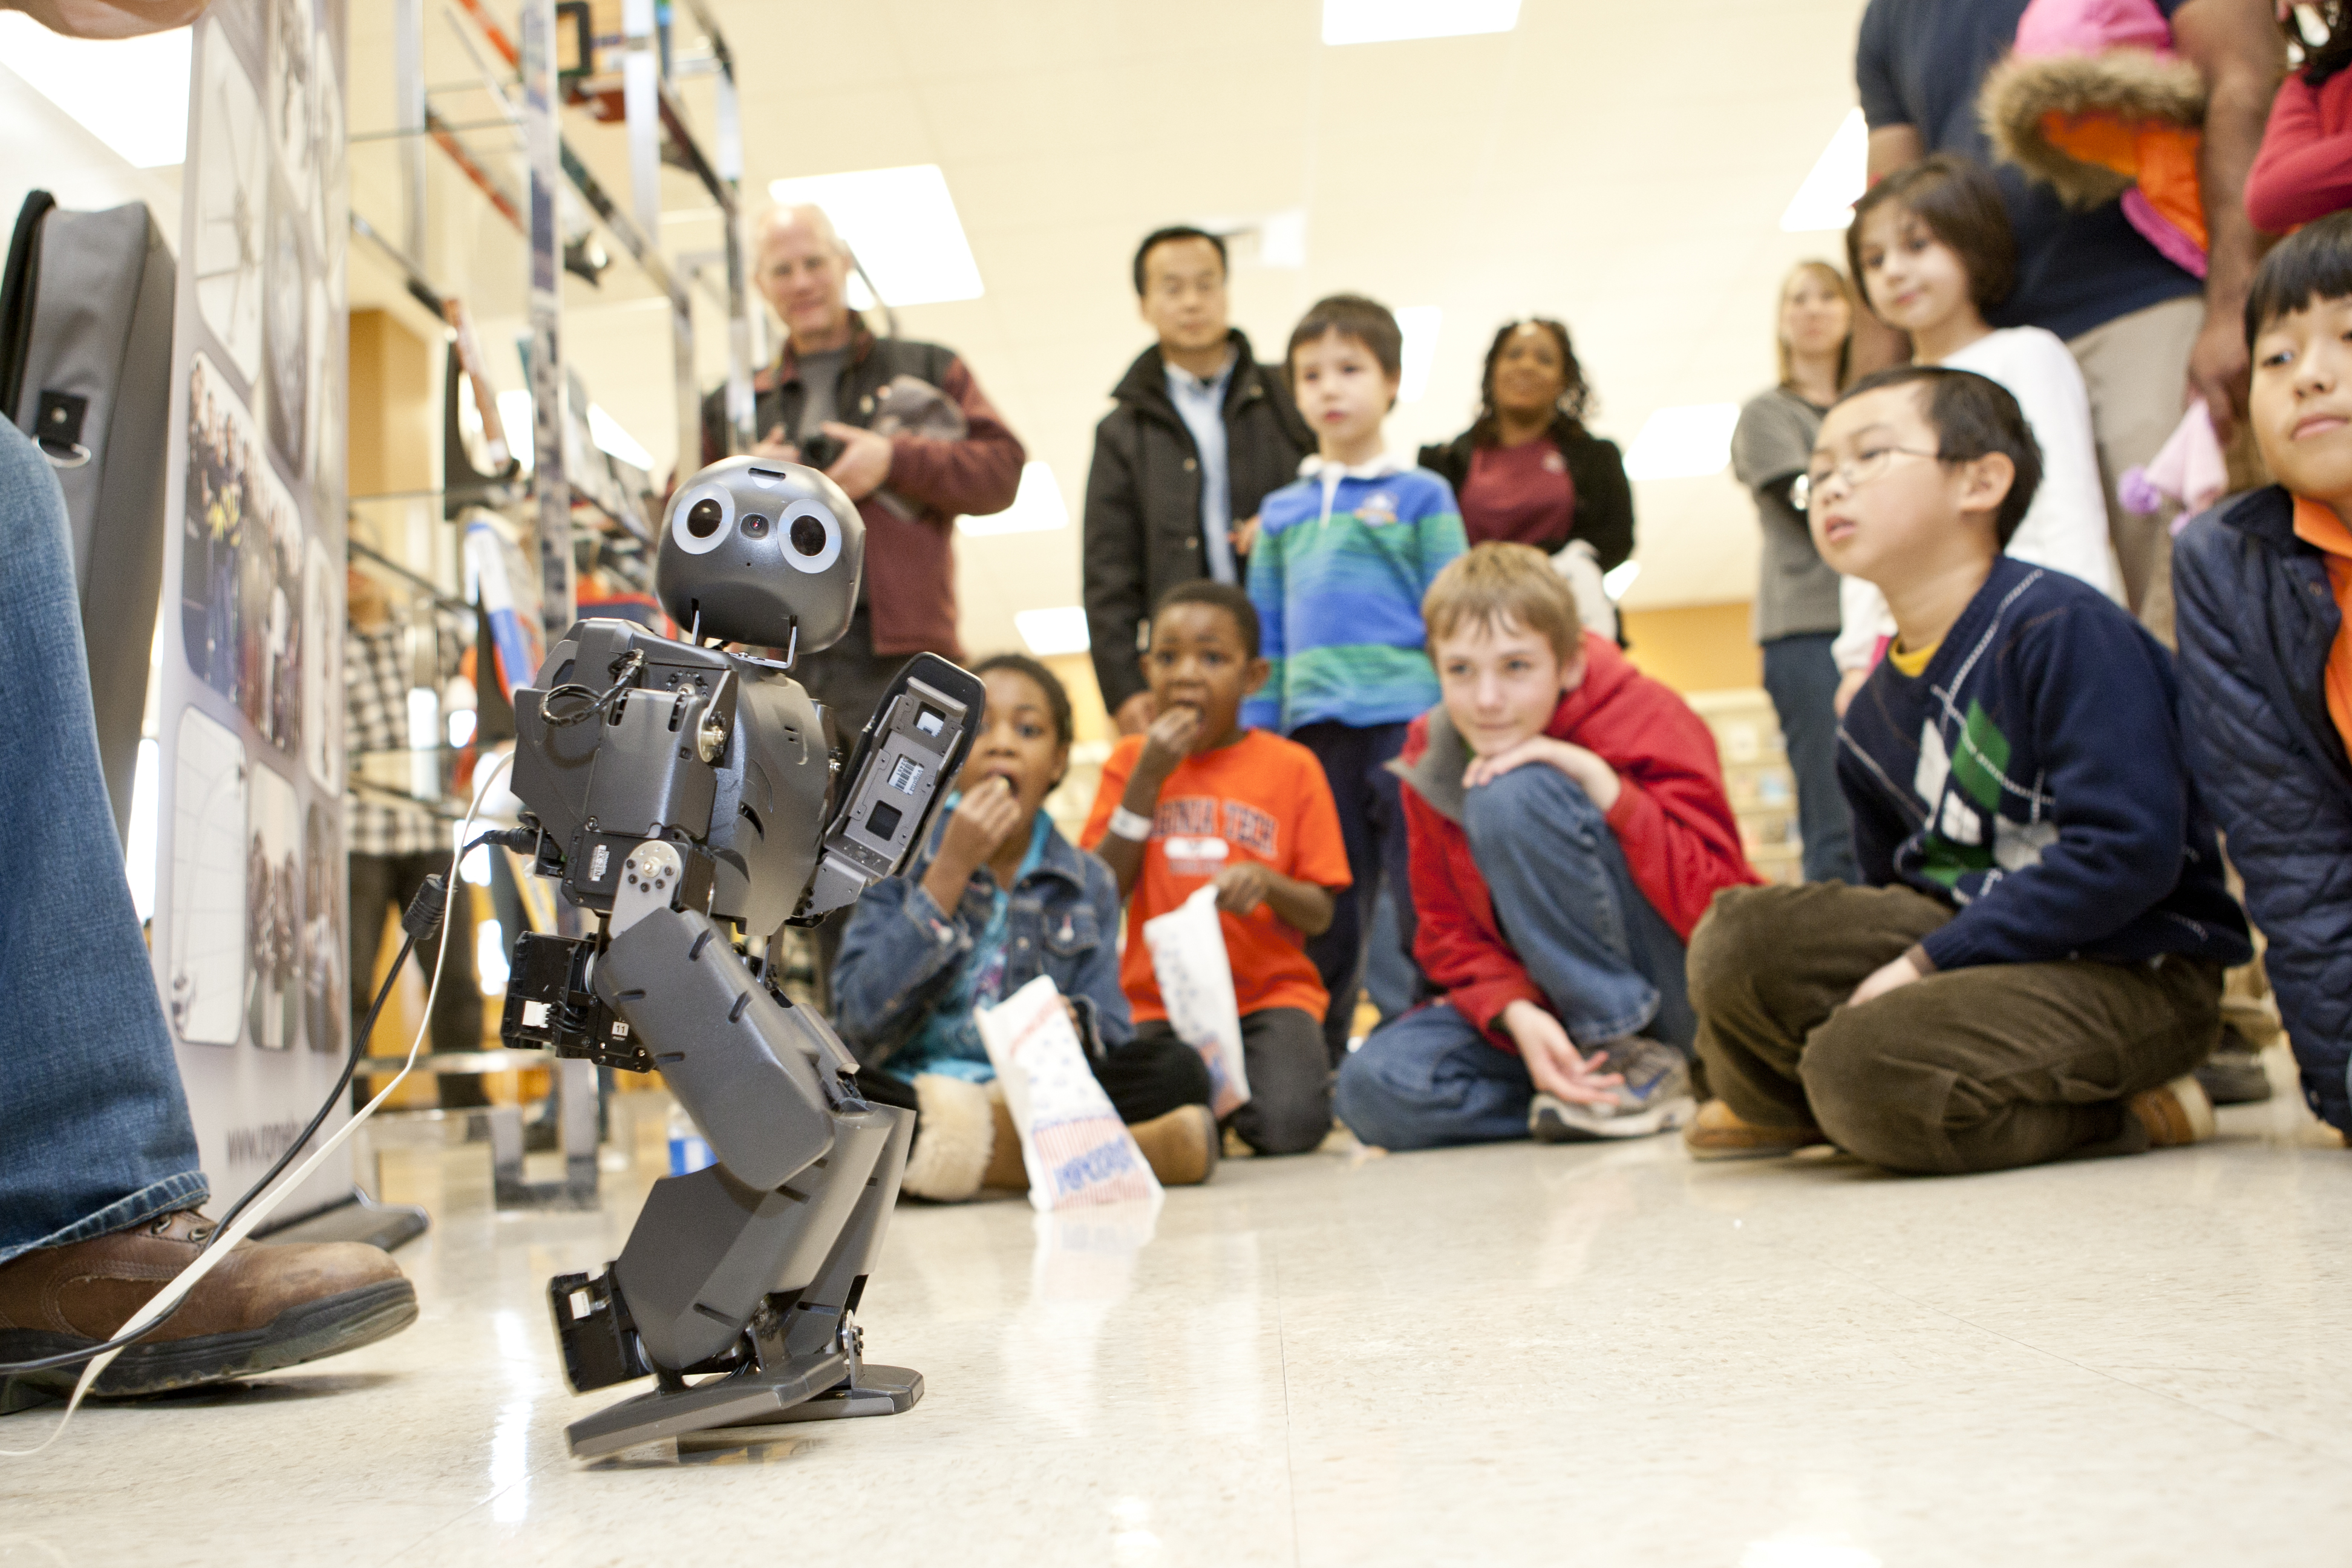 Children watch DARwIn, one of Virginia Tech's robots, play with a ball during an event.